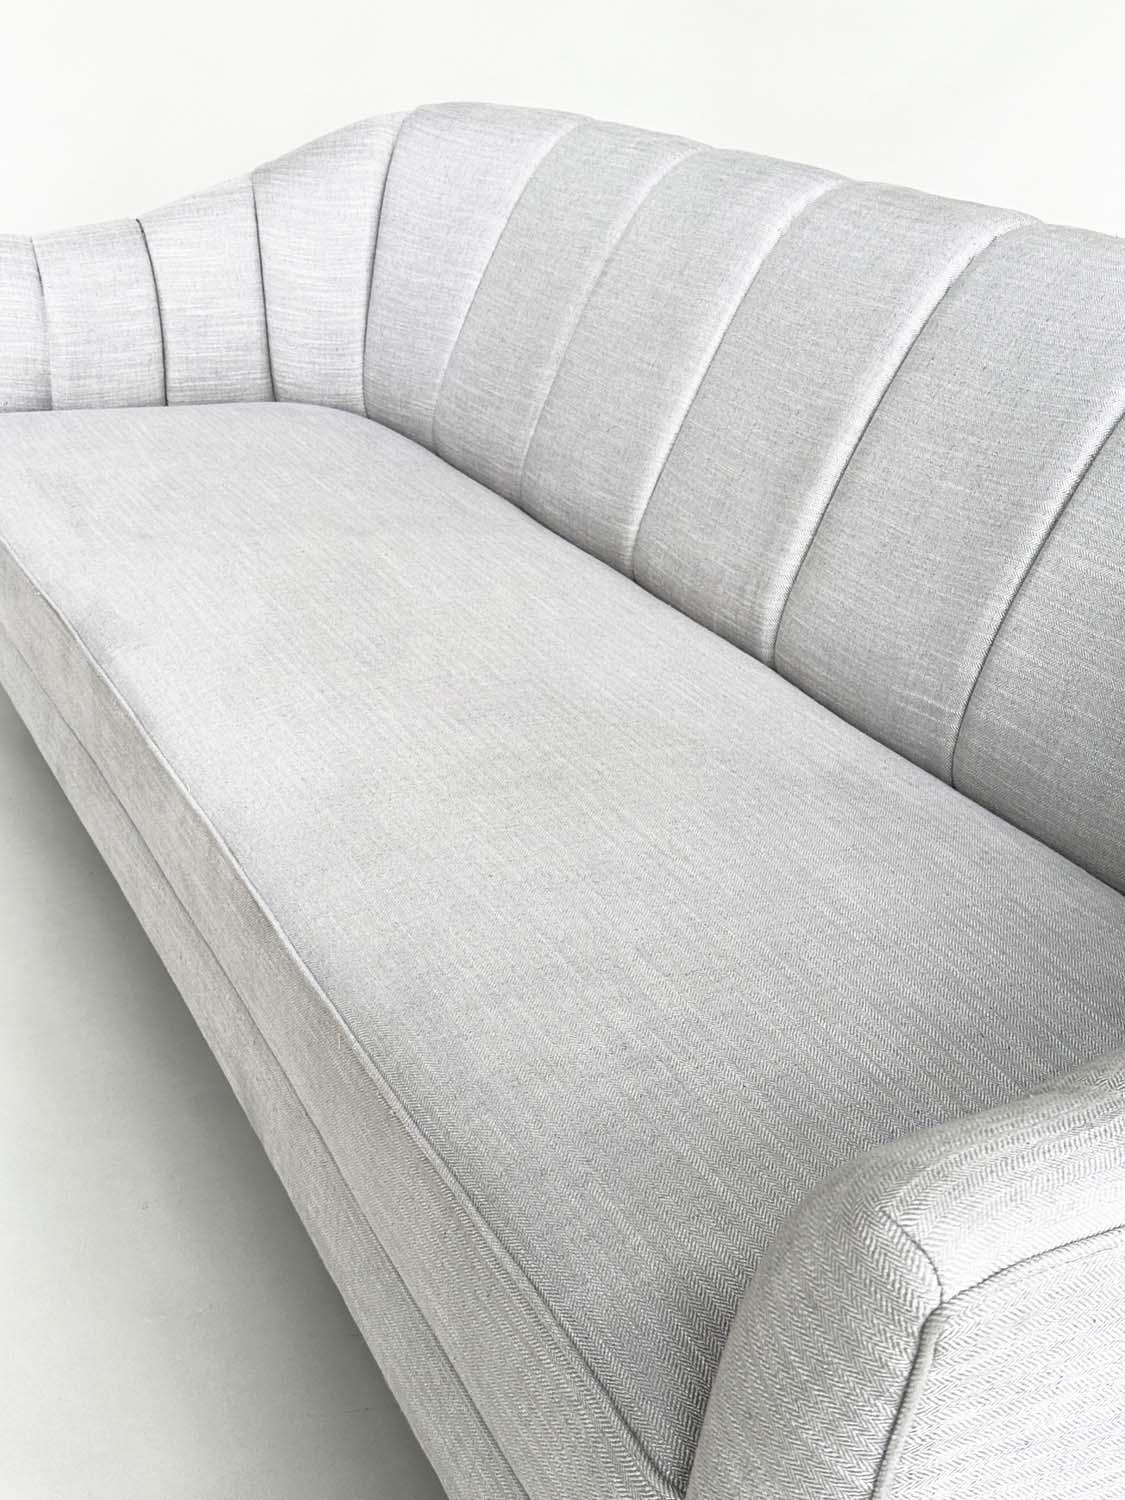 BRAY DESIGN SOFA, ribbed curved back and out swept supports, in Sahco Flint fabric upholstery, 210cm - Image 11 of 11